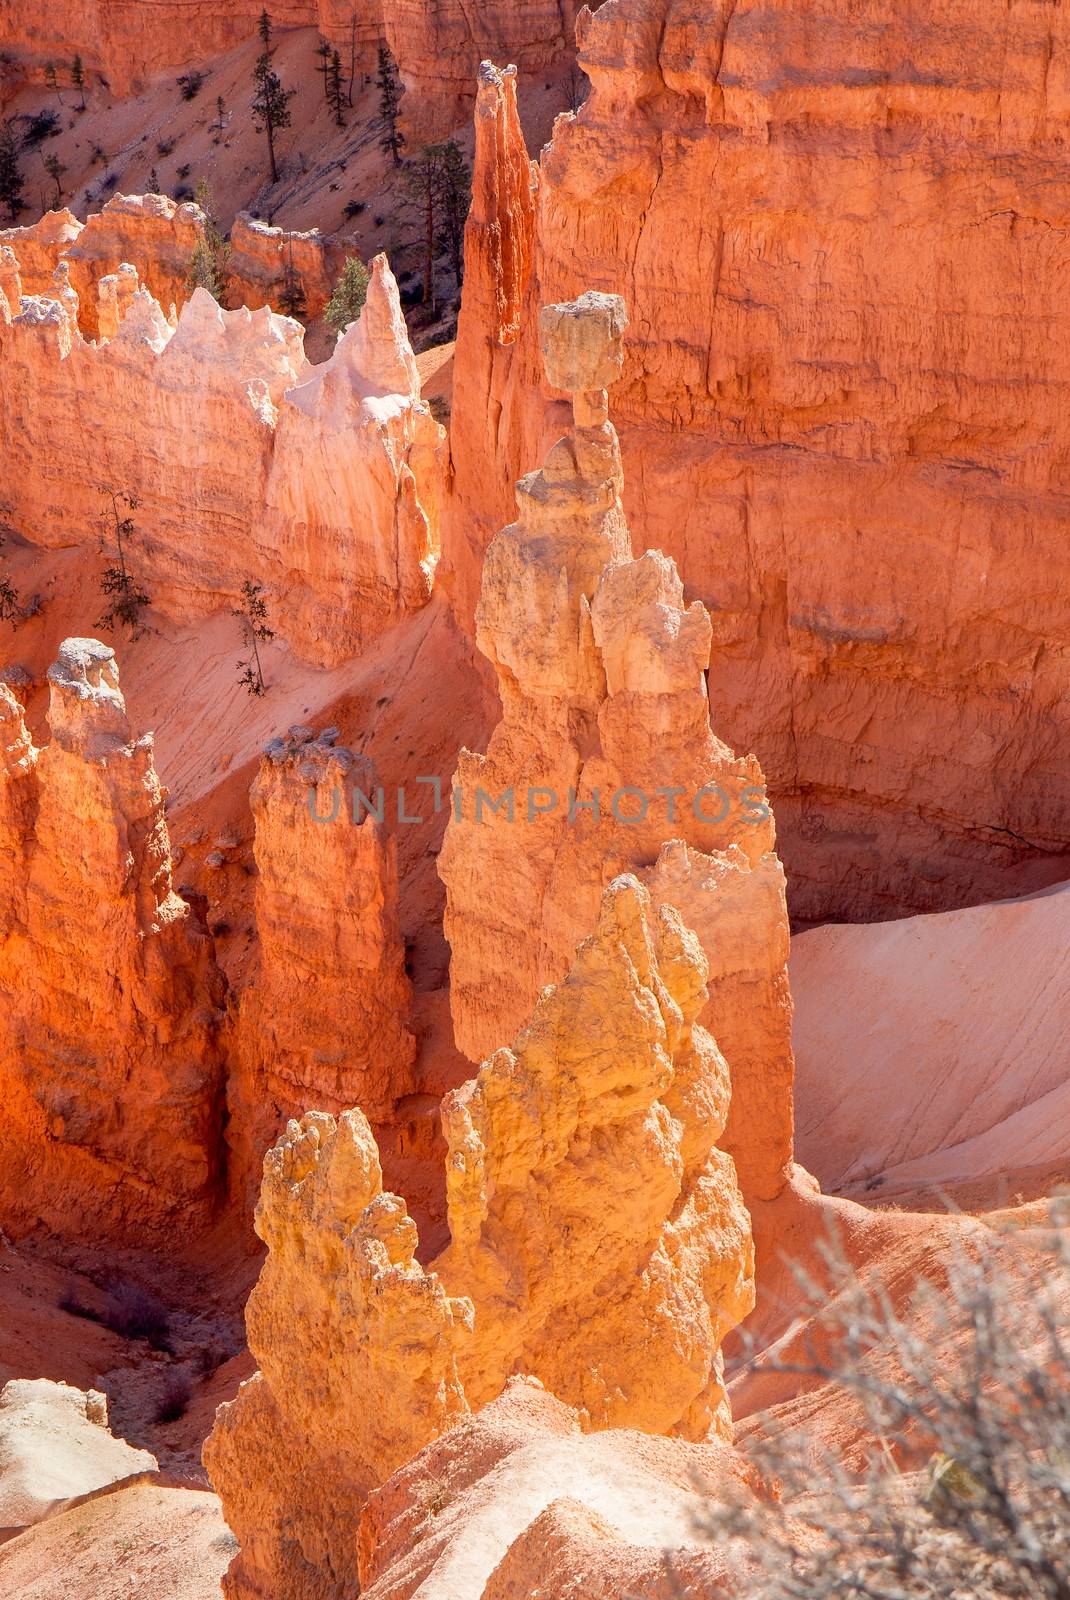 Hoodoos are tall skinny spires of rock that protrude from the bottom of arid basins and uneven lands. They are abundant here at Bryce Canyon National Park.